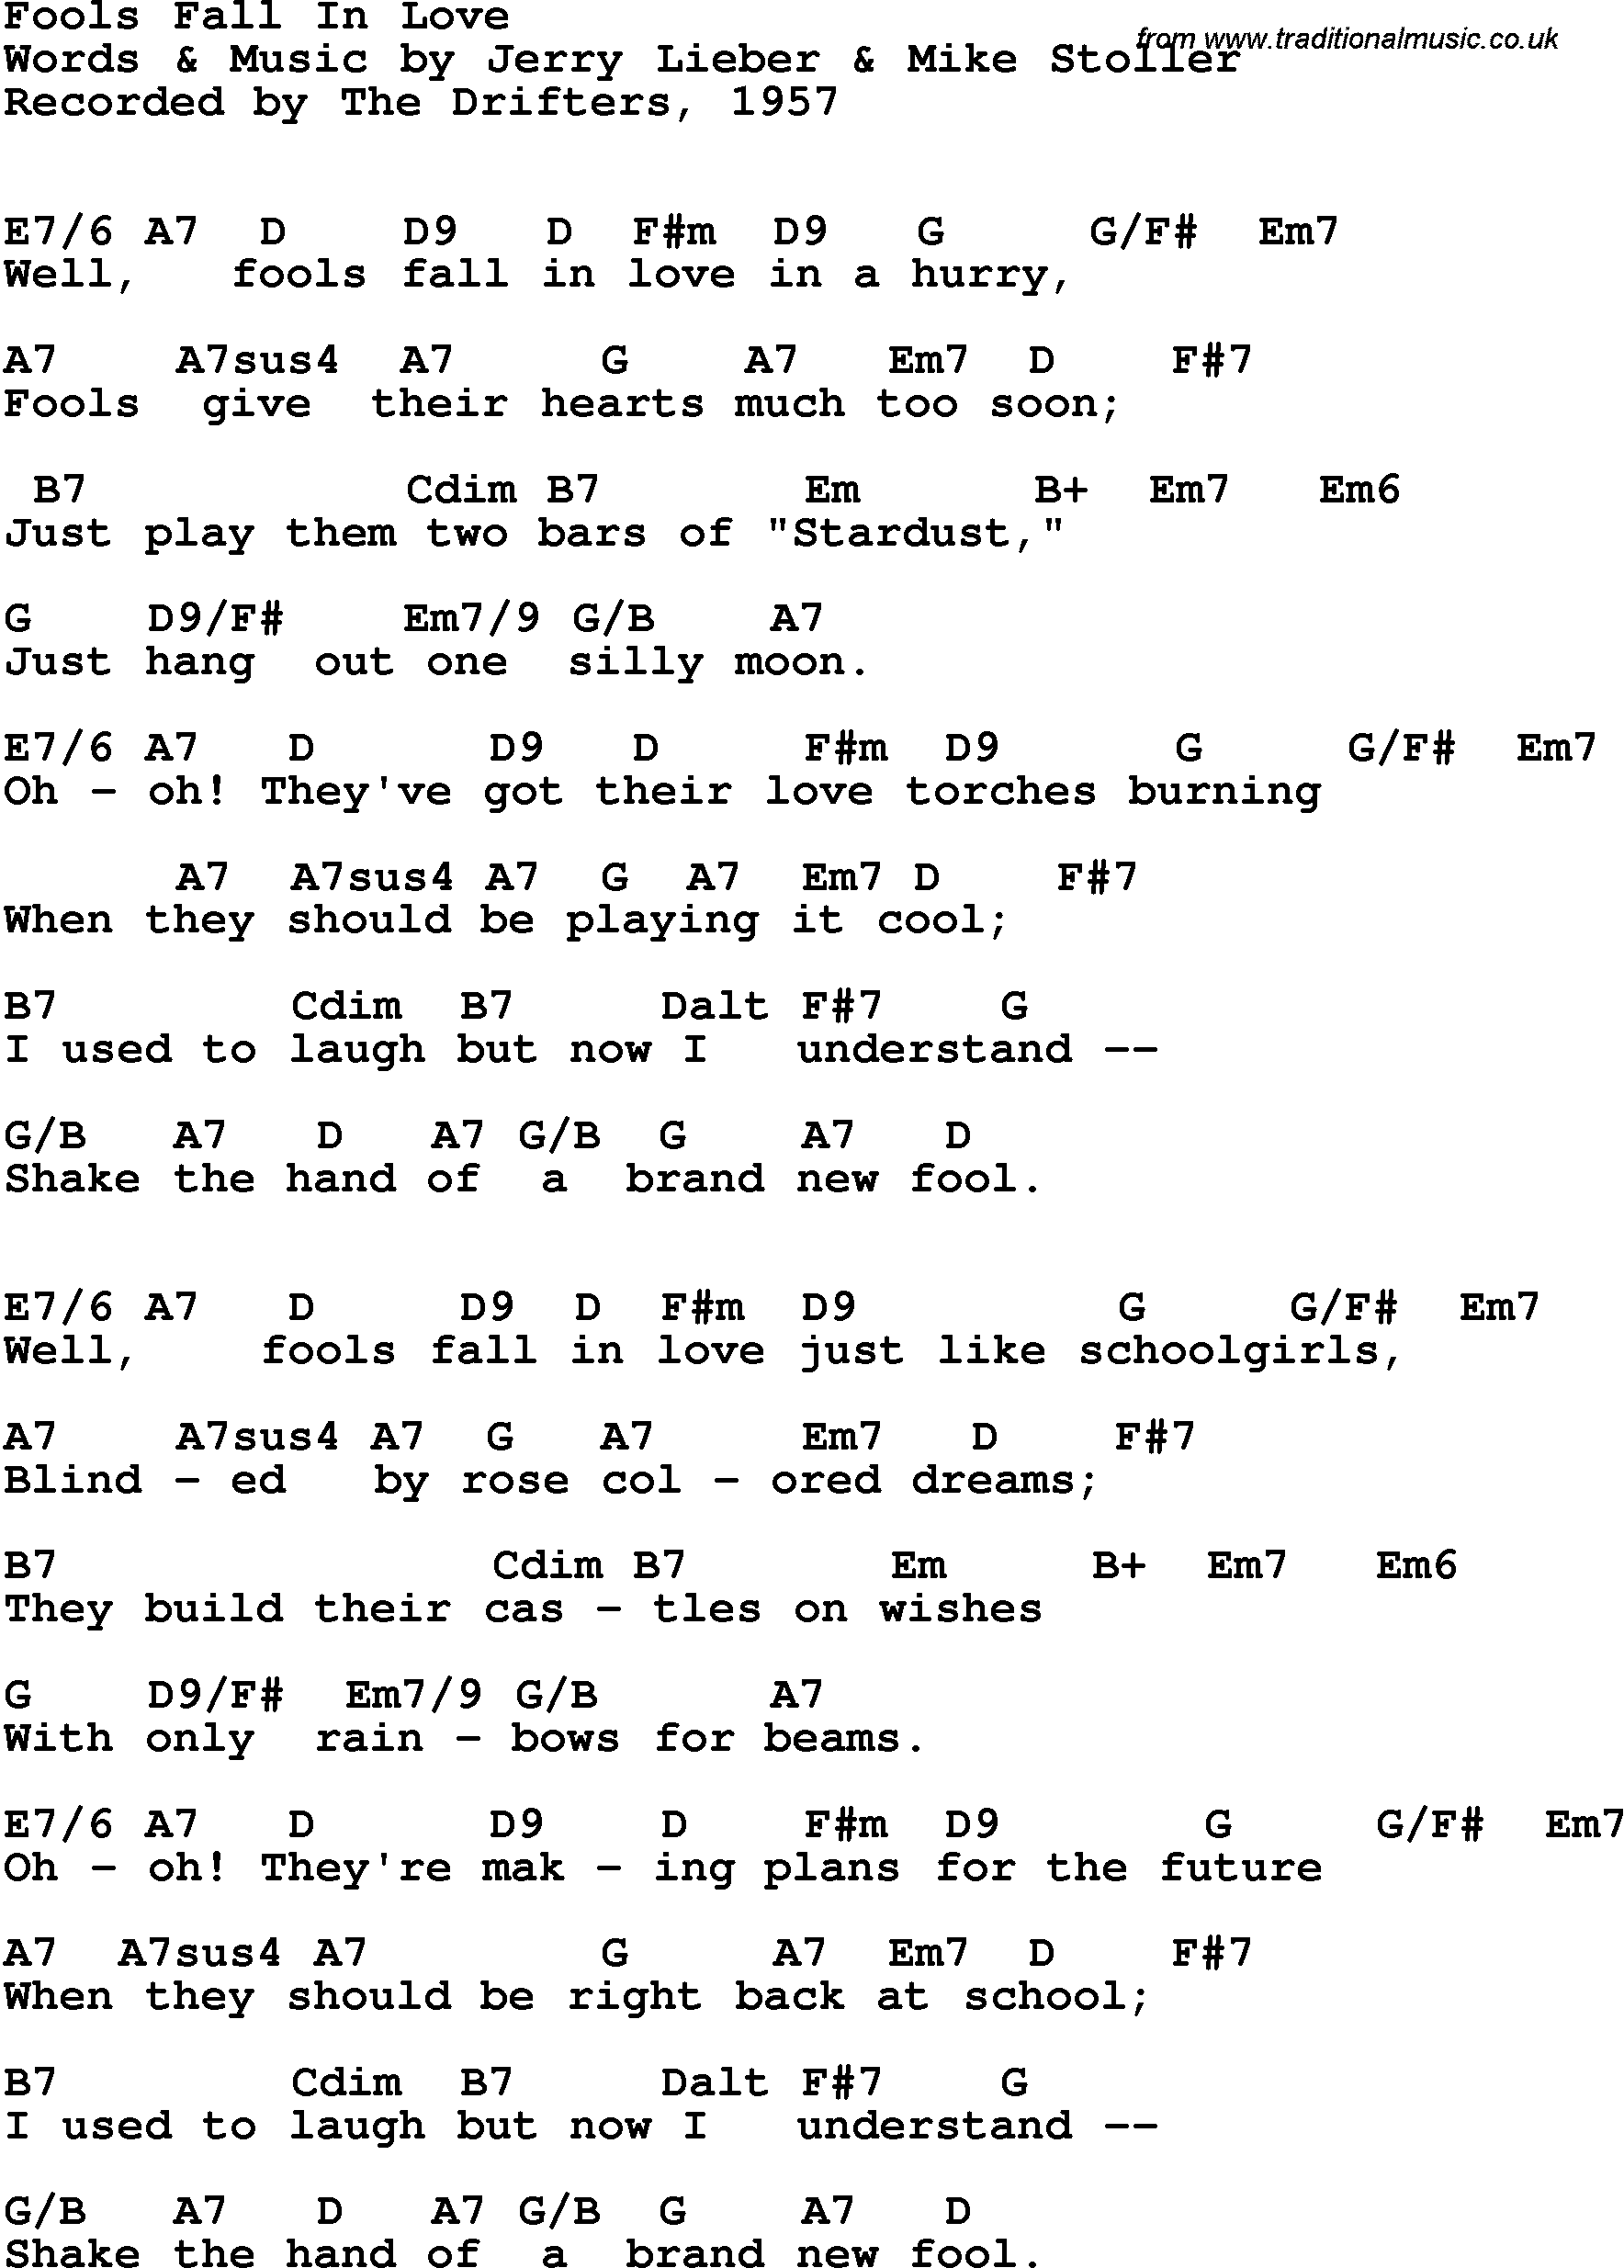 Song Lyrics with guitar chords for Fools Fall In Love - The Drifters, 1957